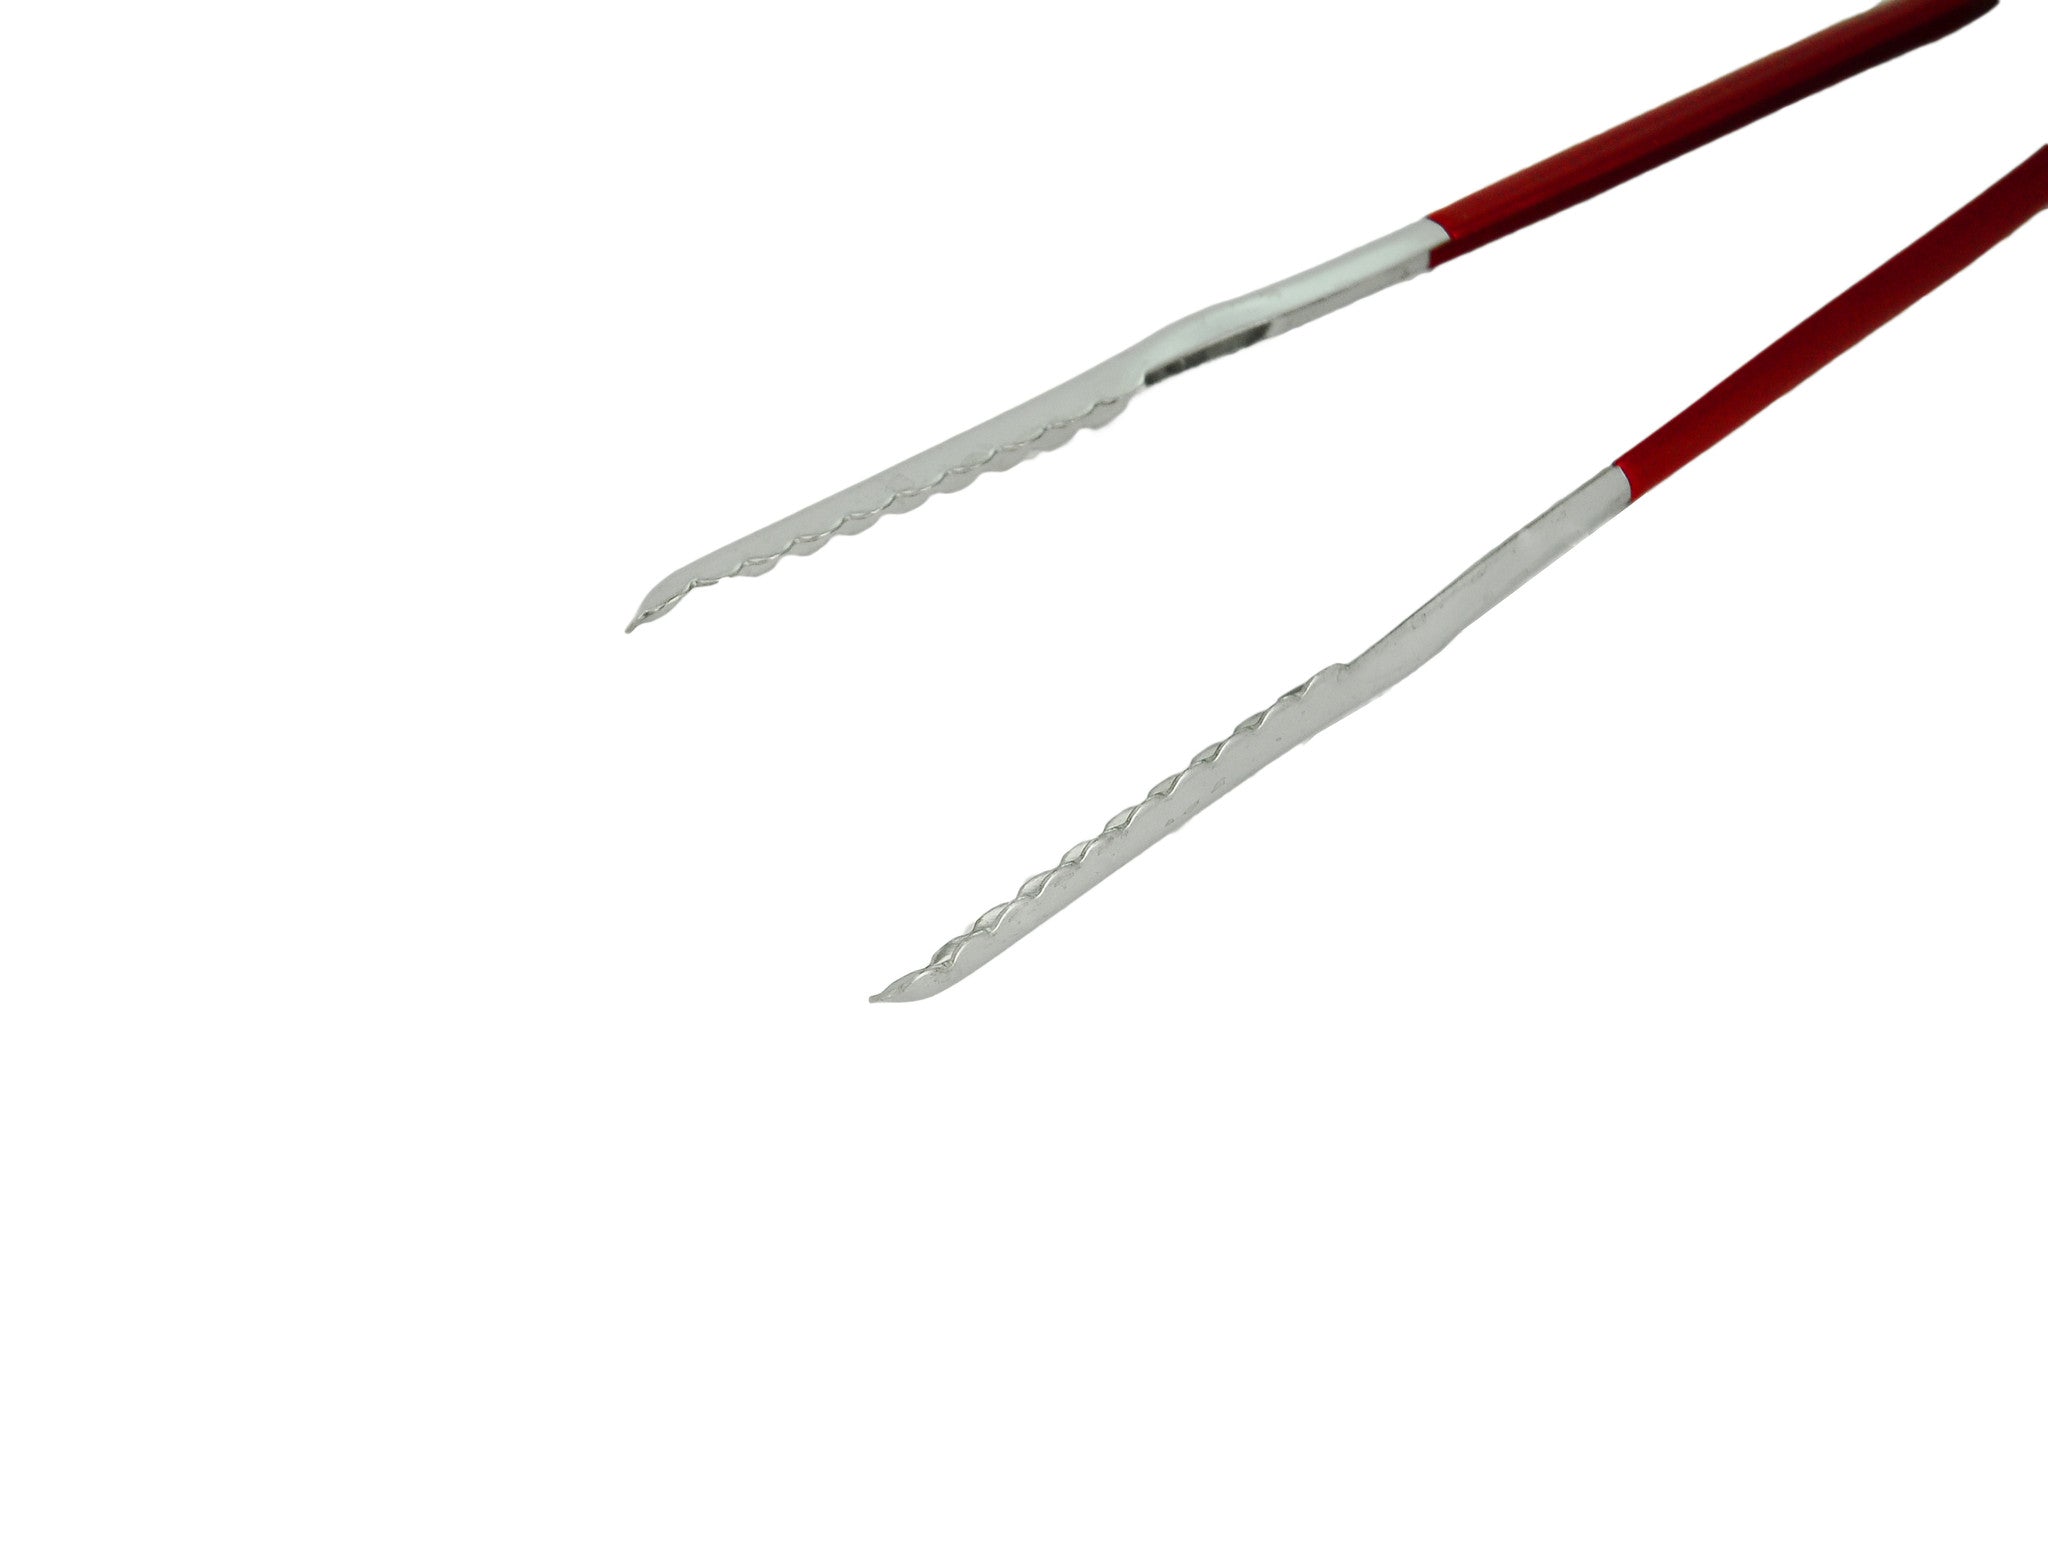 Stainless Steel Tongs with Coated Red Handle (코팅 얼음 집게), Kitchen Tools - eKitchenary